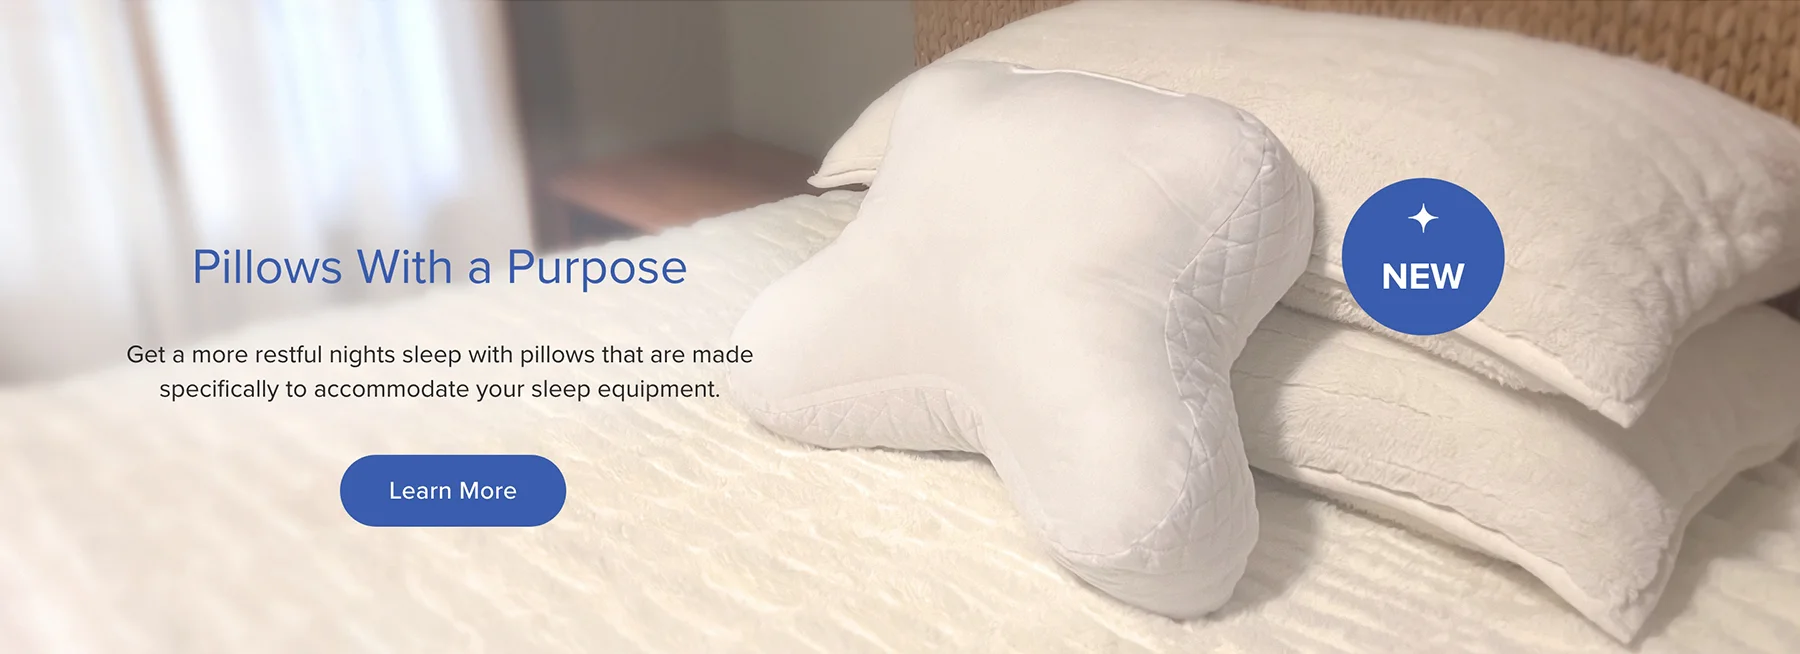 Core® Pillows for use with Sleep Equipment.